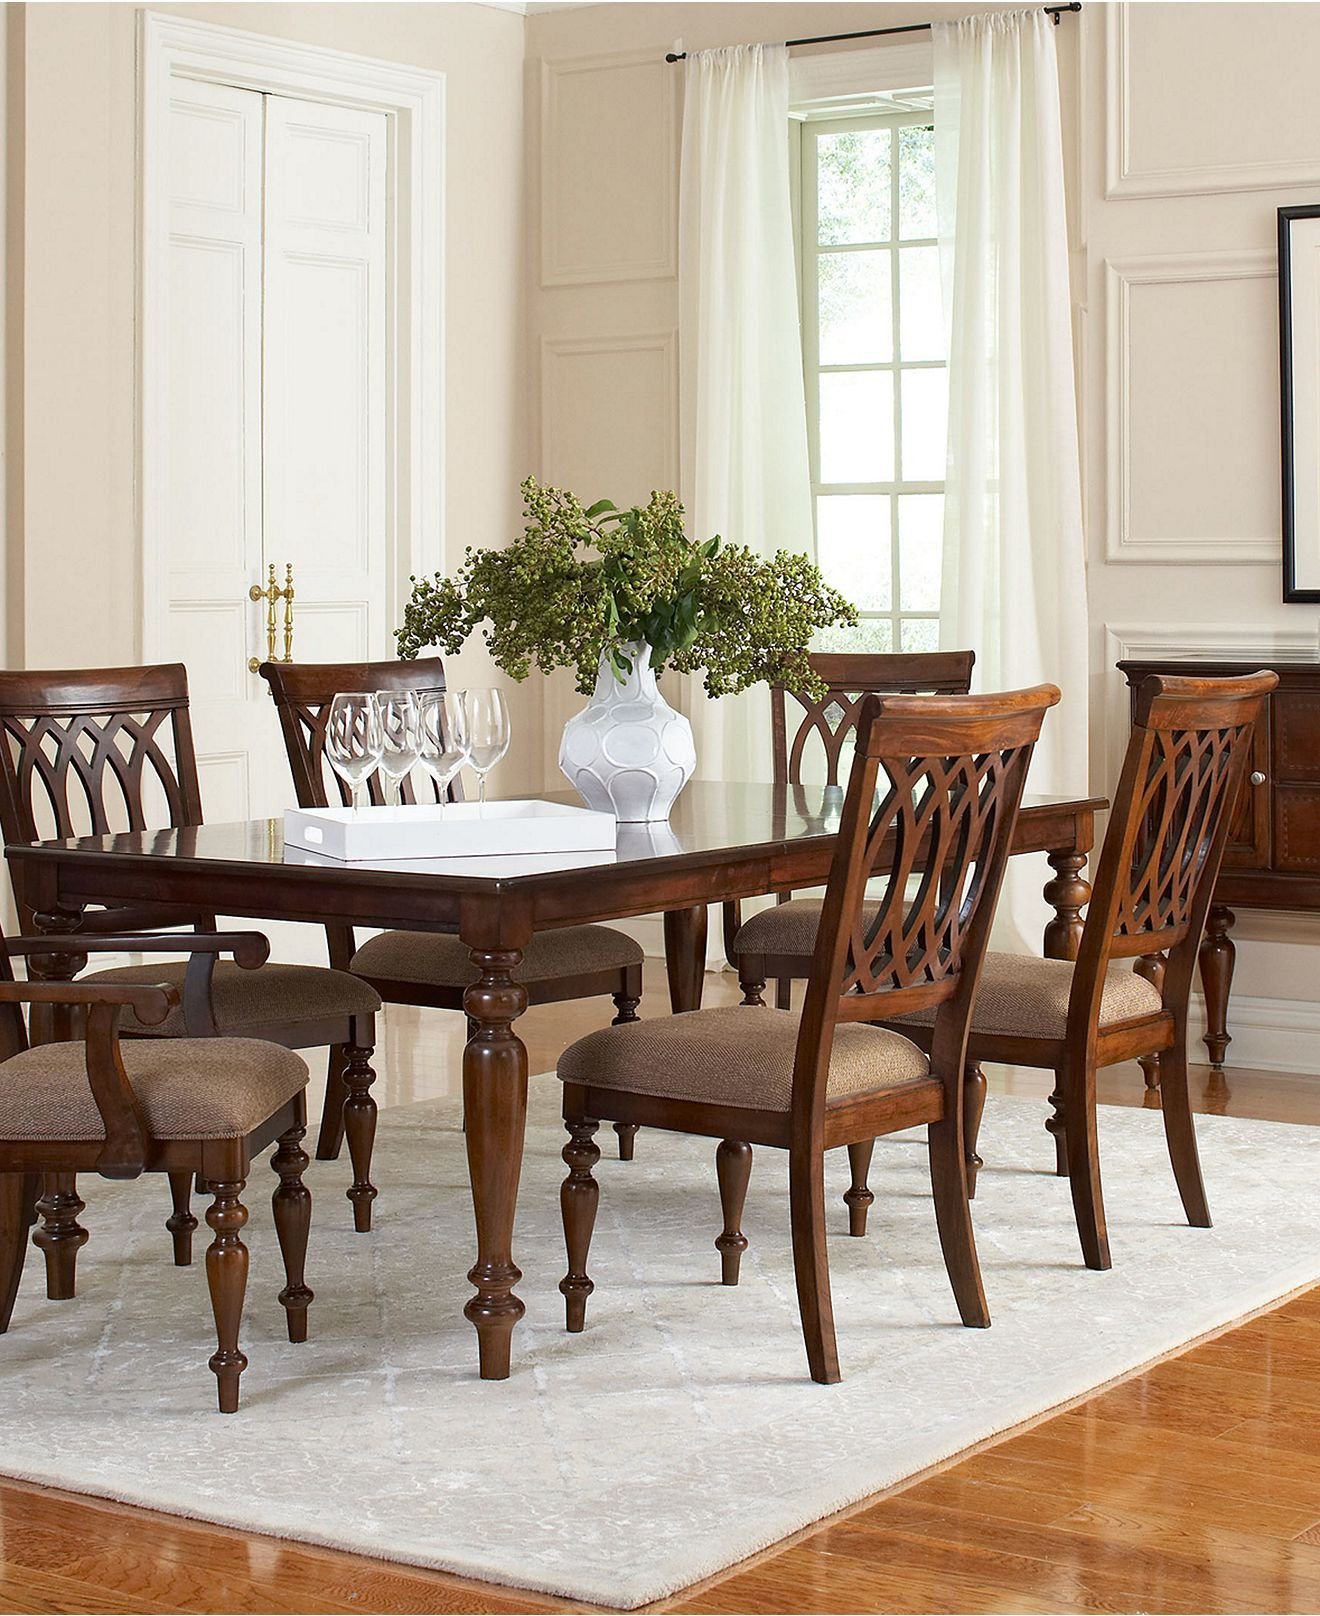 Crestwood Dining Room Furniture Collection Dining Room within measurements 1320 X 1616